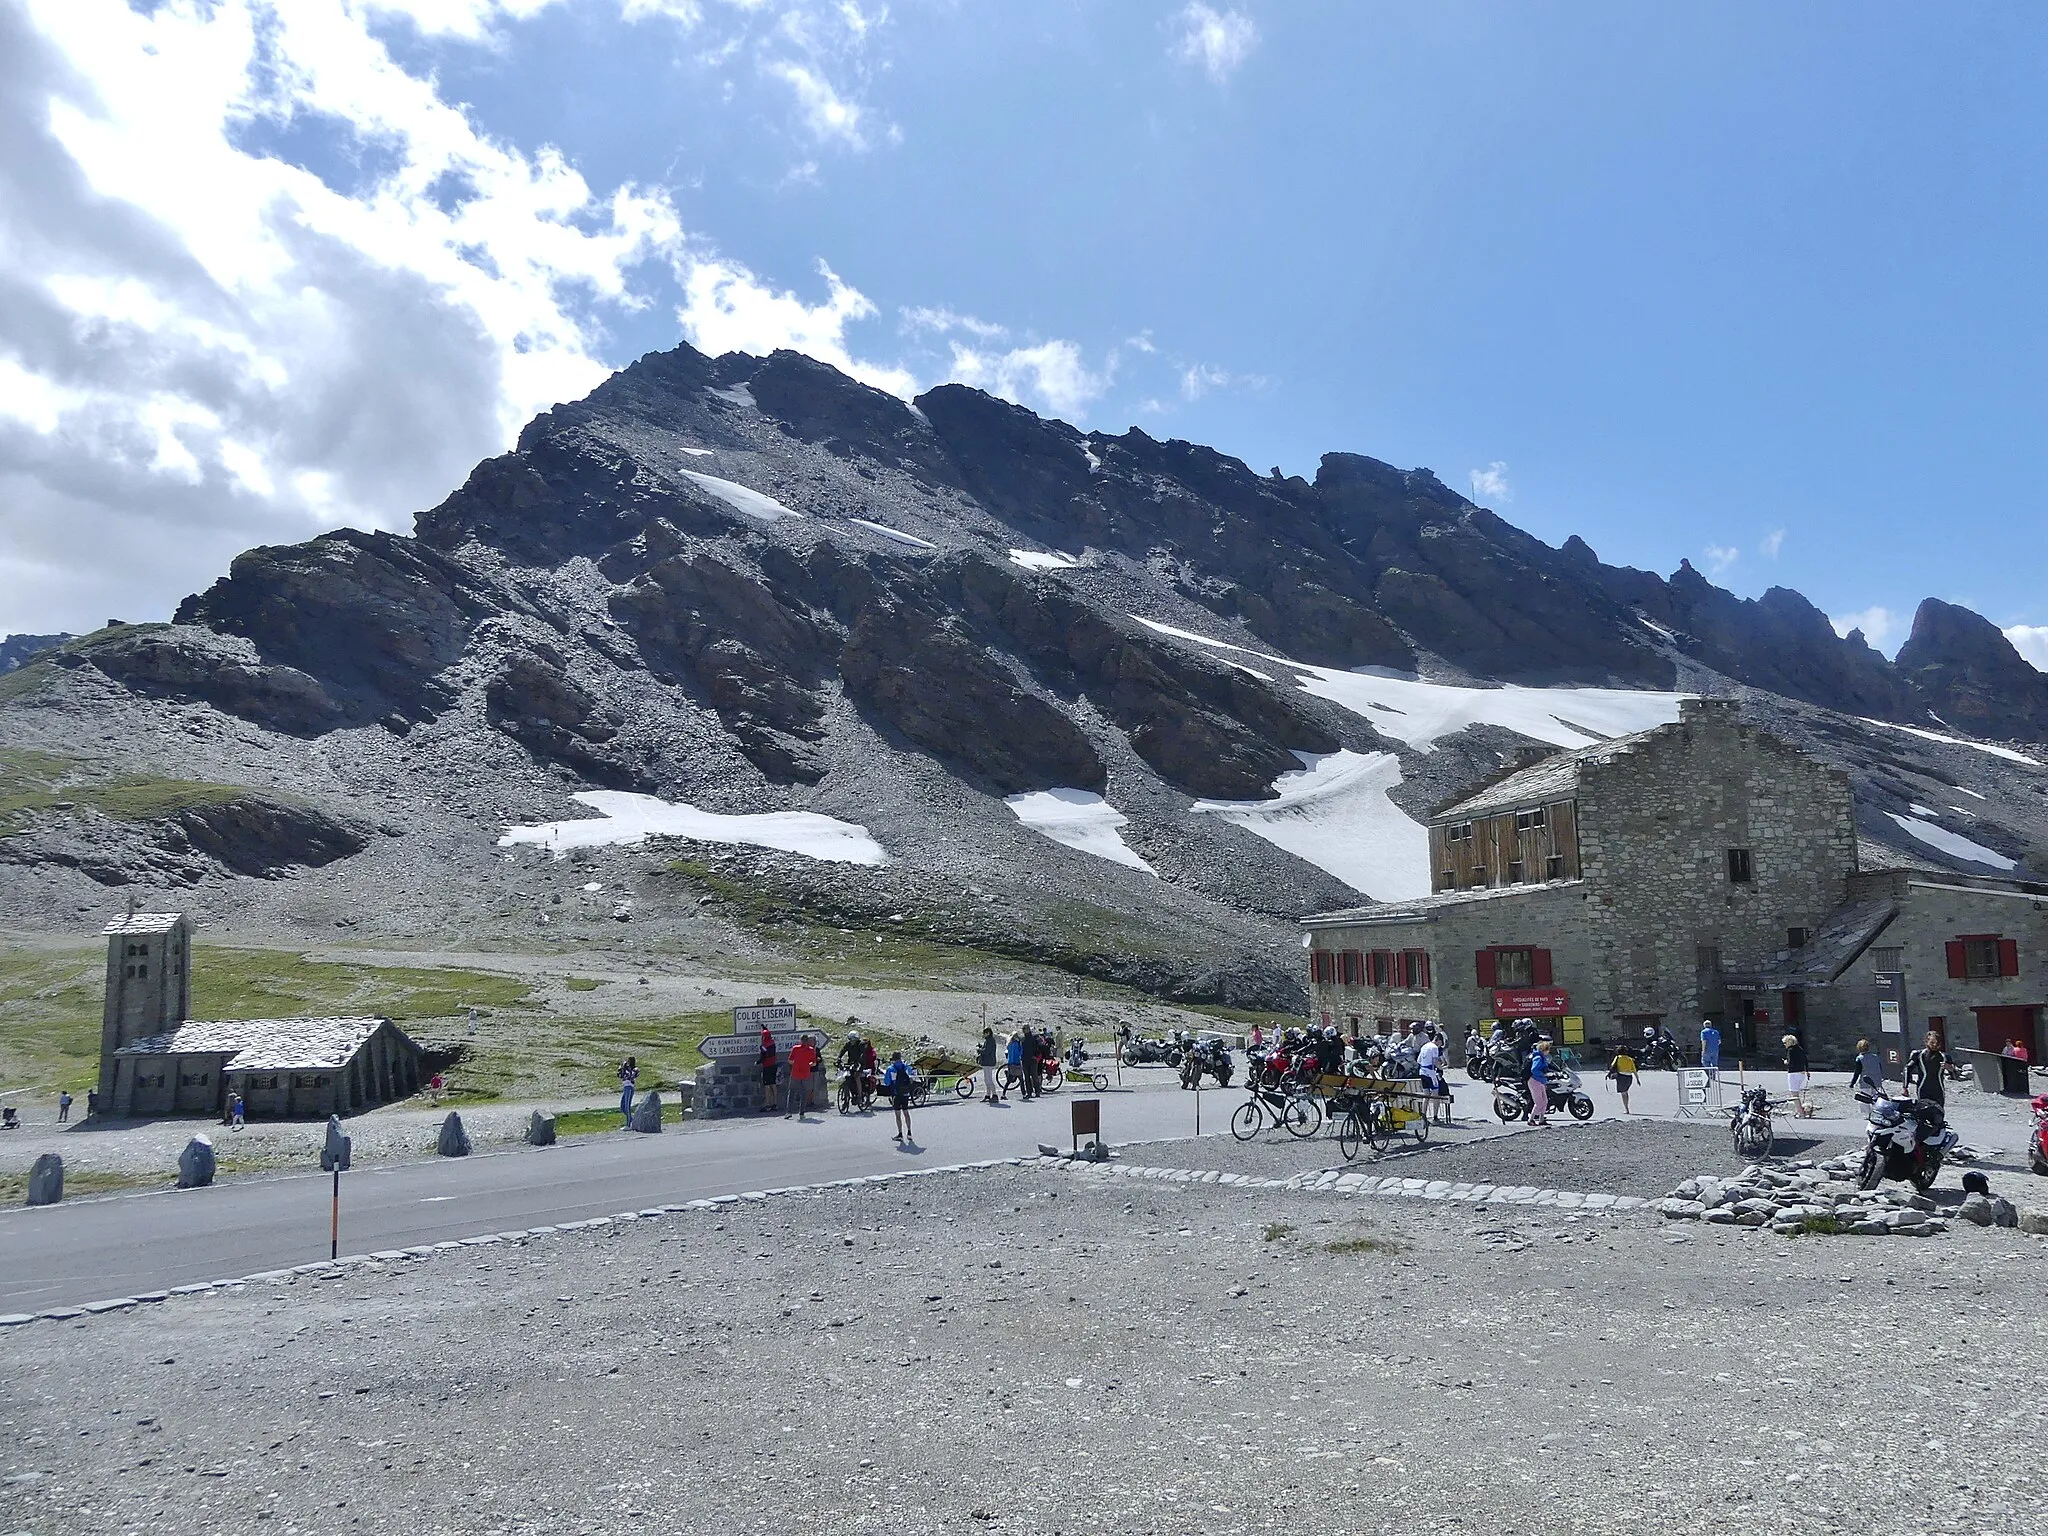 Photo showing: Sight, in summer, of the col de l'Iseran pass at 2,770 meters high, between Bonneval-sur-Arc in Maurienne (left) and Val-d'Isère in Tarentaise (right), in Savoie, France.